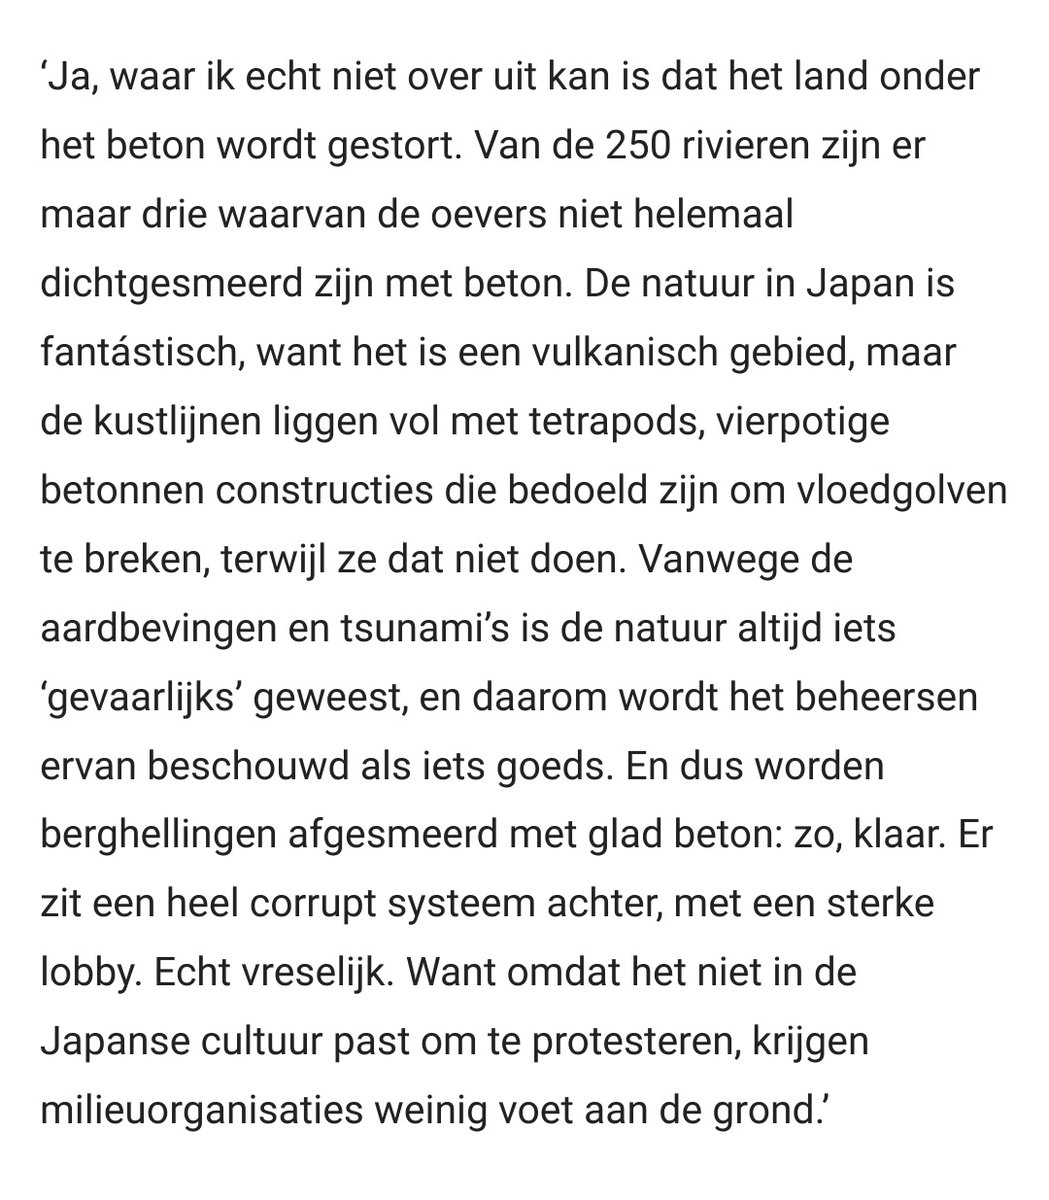 Of course the reasons behind the concrete don't warrant proper analysis.To the presenter, the answer is clear: Japan is wrongly trying to "control" nature. It's the work of a "corrupt system", and protesting against it "doesn't fit Japanese culture". https://cultureelpersbureau.nl/2020/04/buigen-beton-en-bruine-suiker-waarom-paulien-cornelisse-niet-uitgekeken-raakt-op-japan/